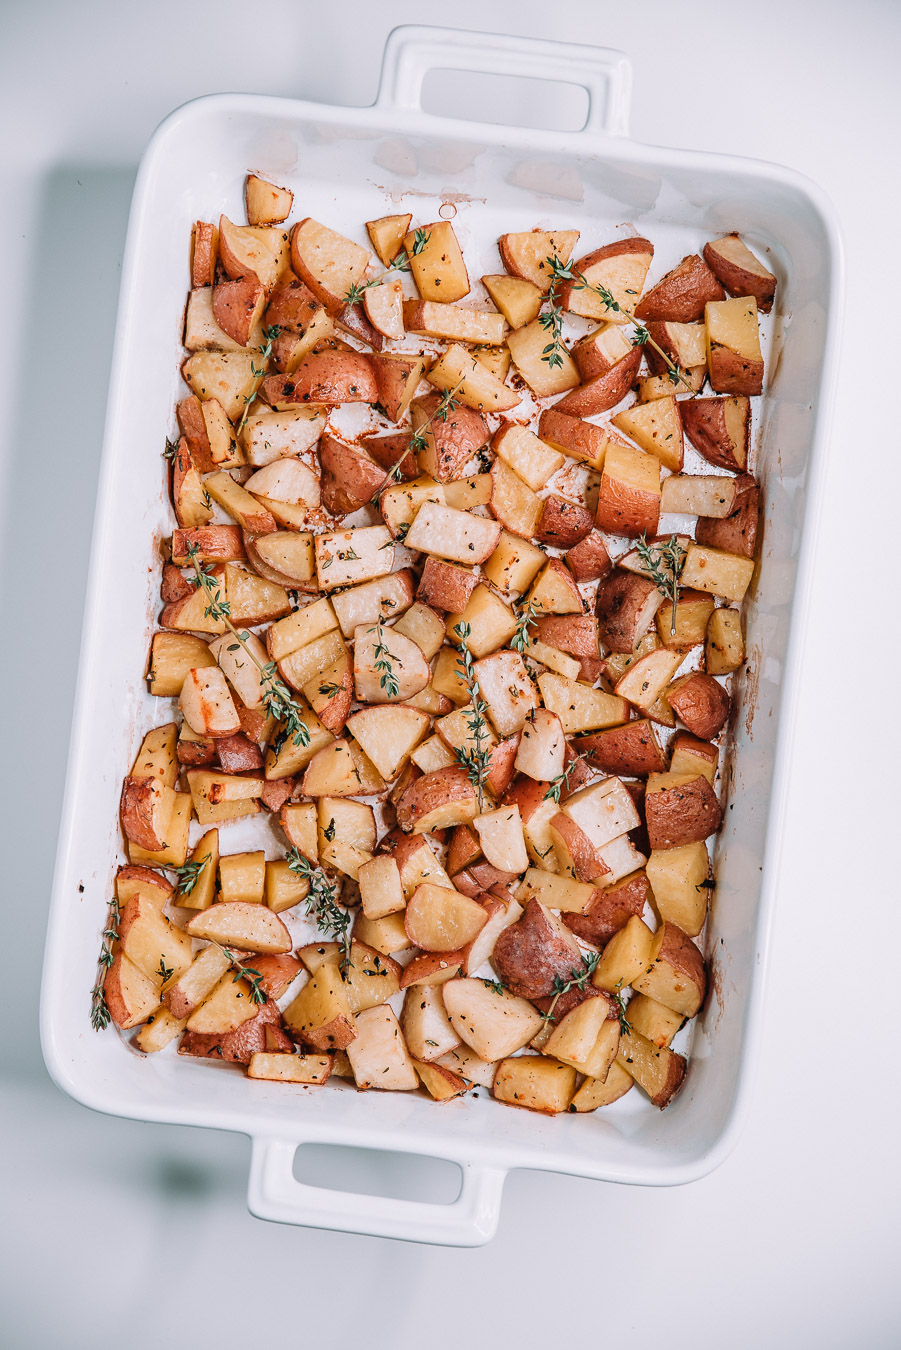 garlic and thyme potatoes in a white baking dish on a white table